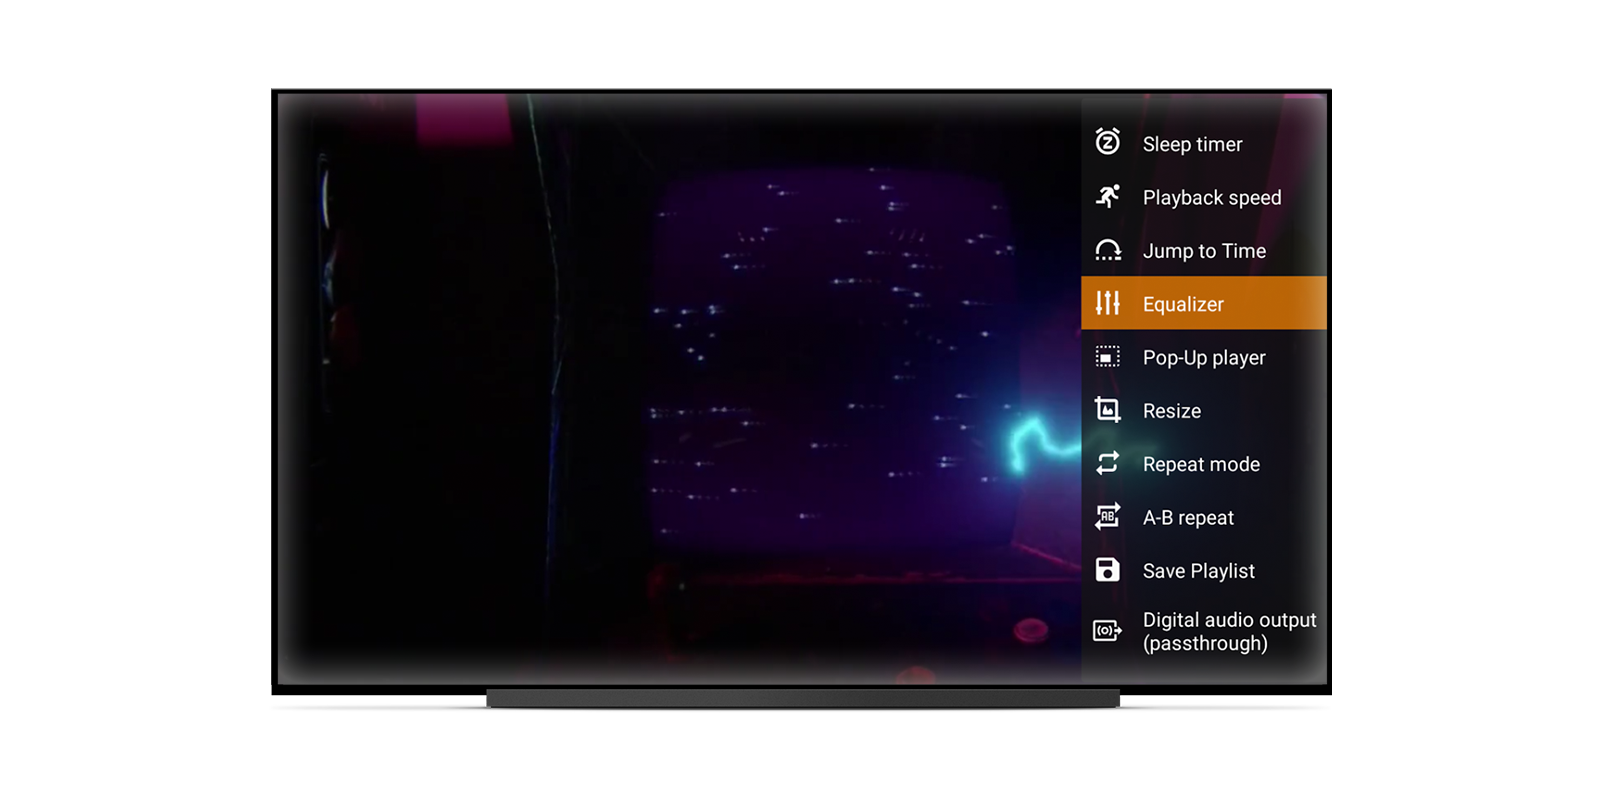 VLC optimizes for large-screen, leanback viewing experiences on Android TV